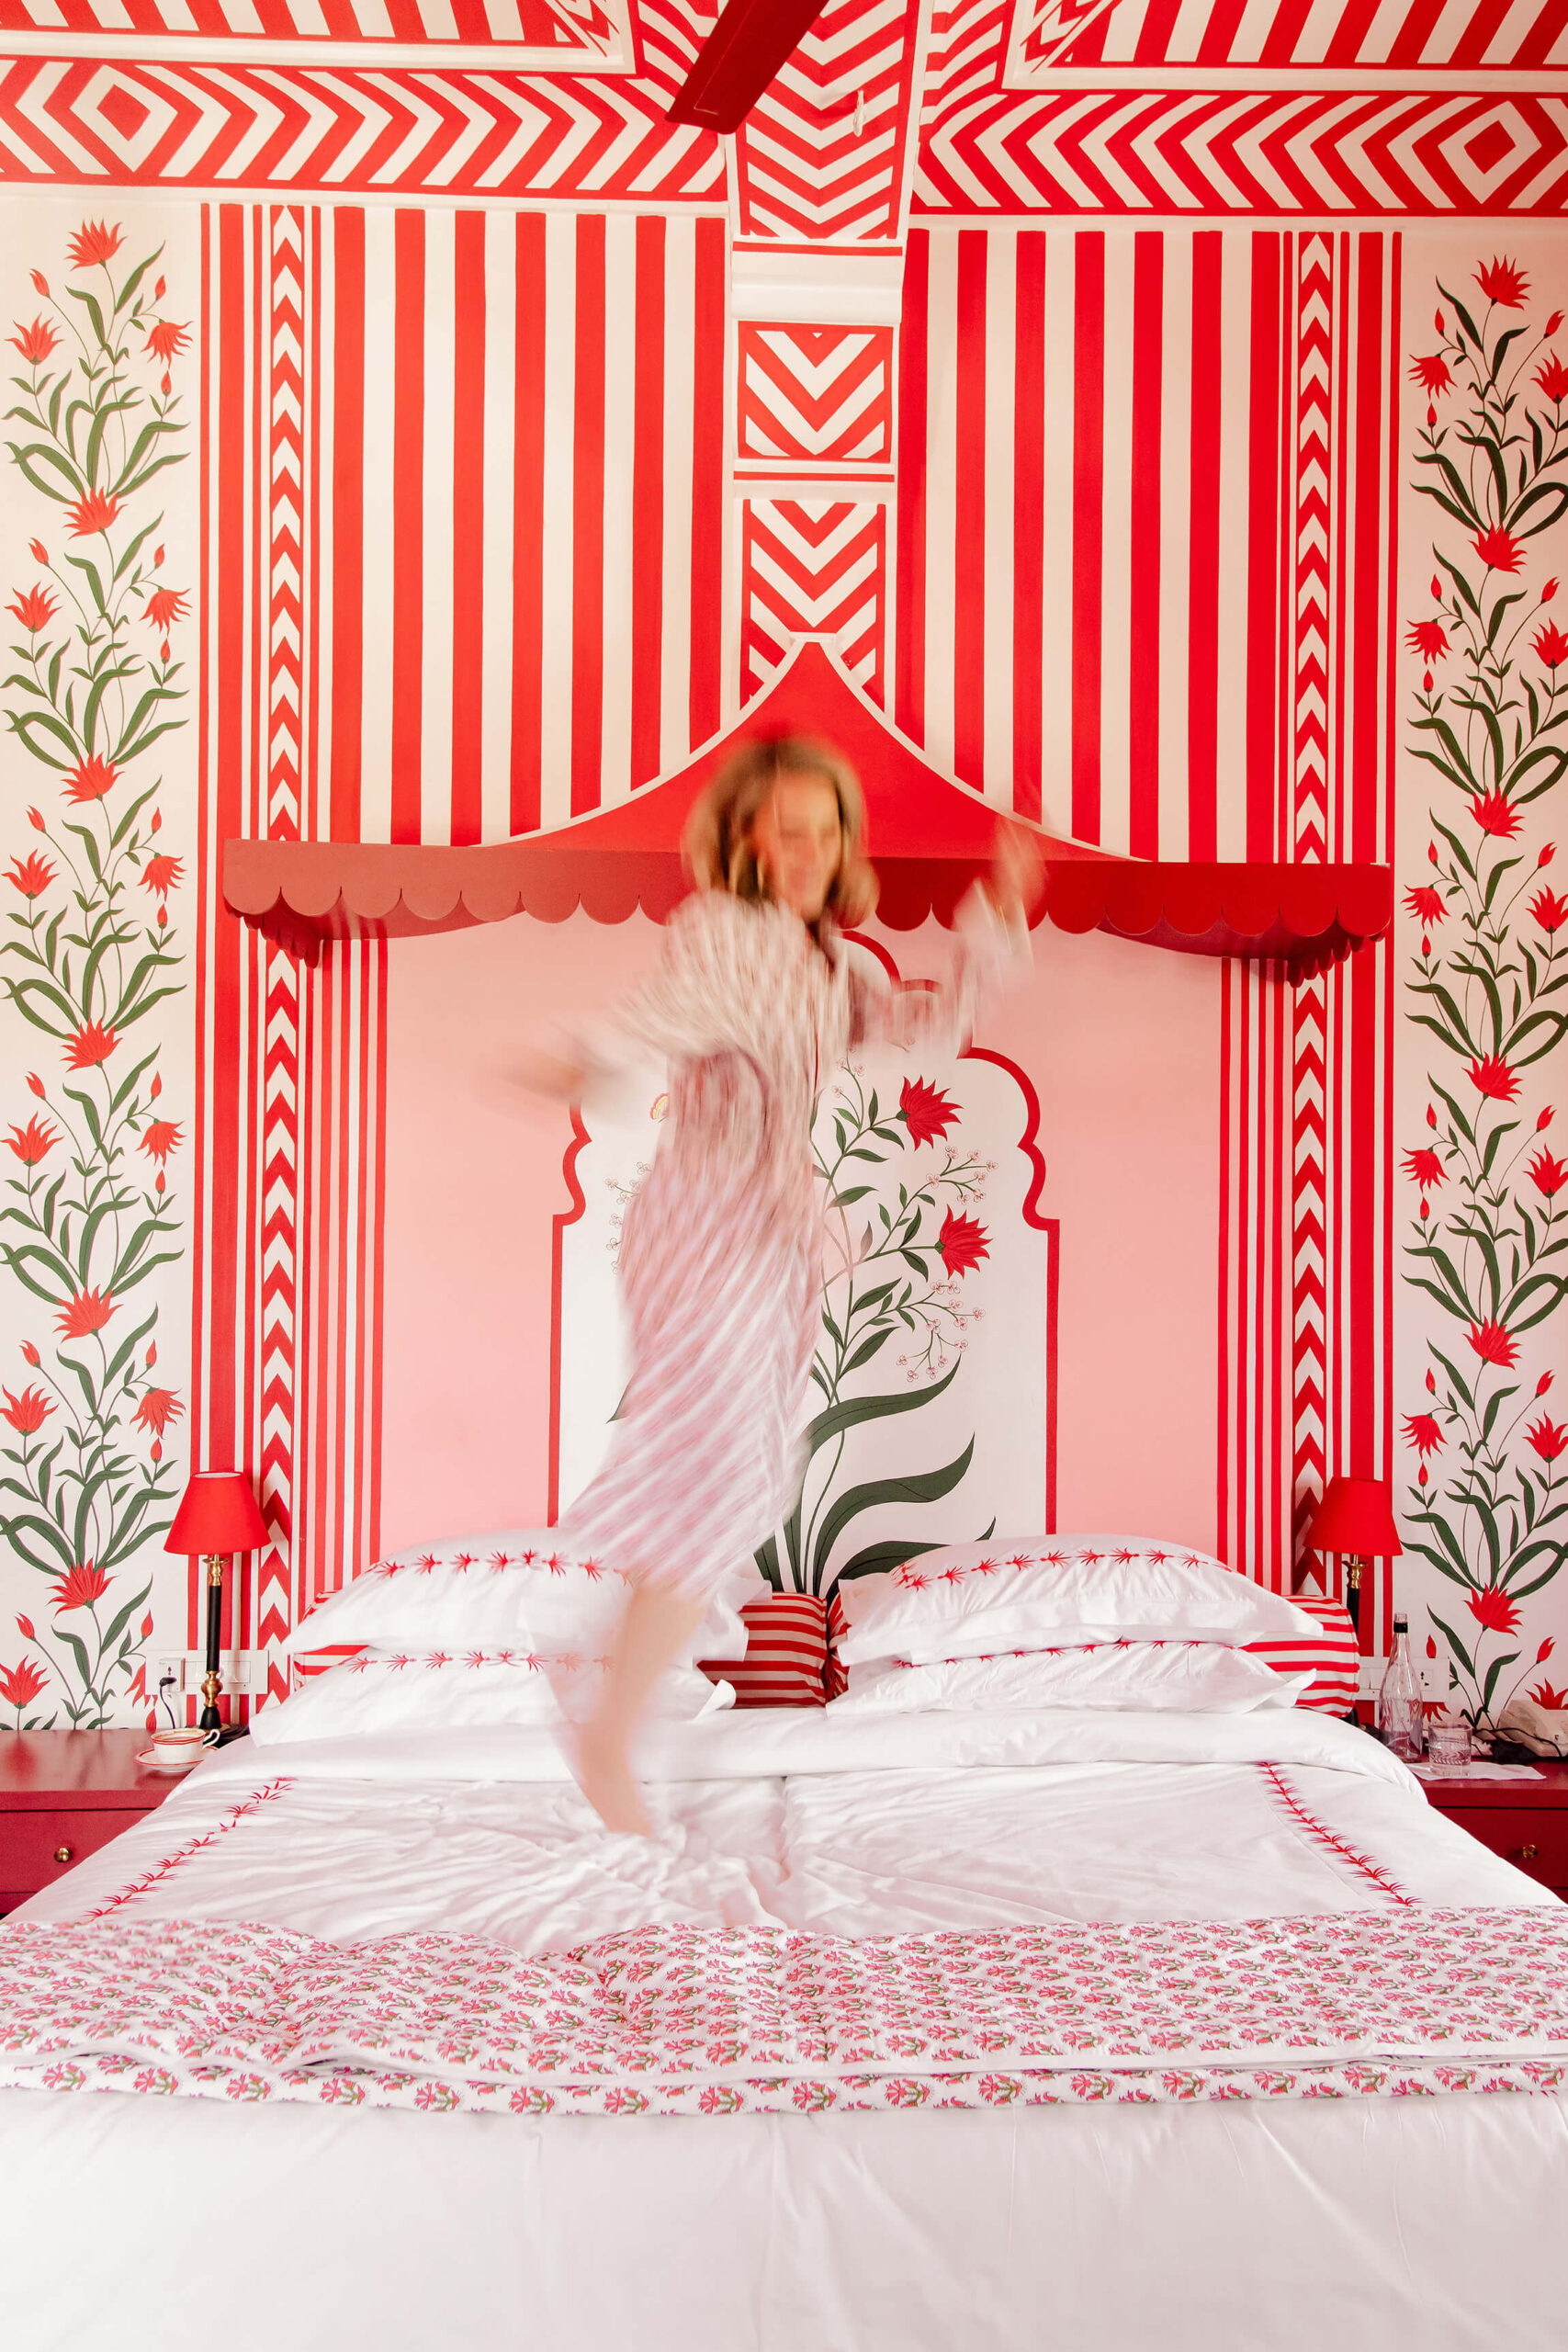 Woman jumping on a bed because happiness is a choice